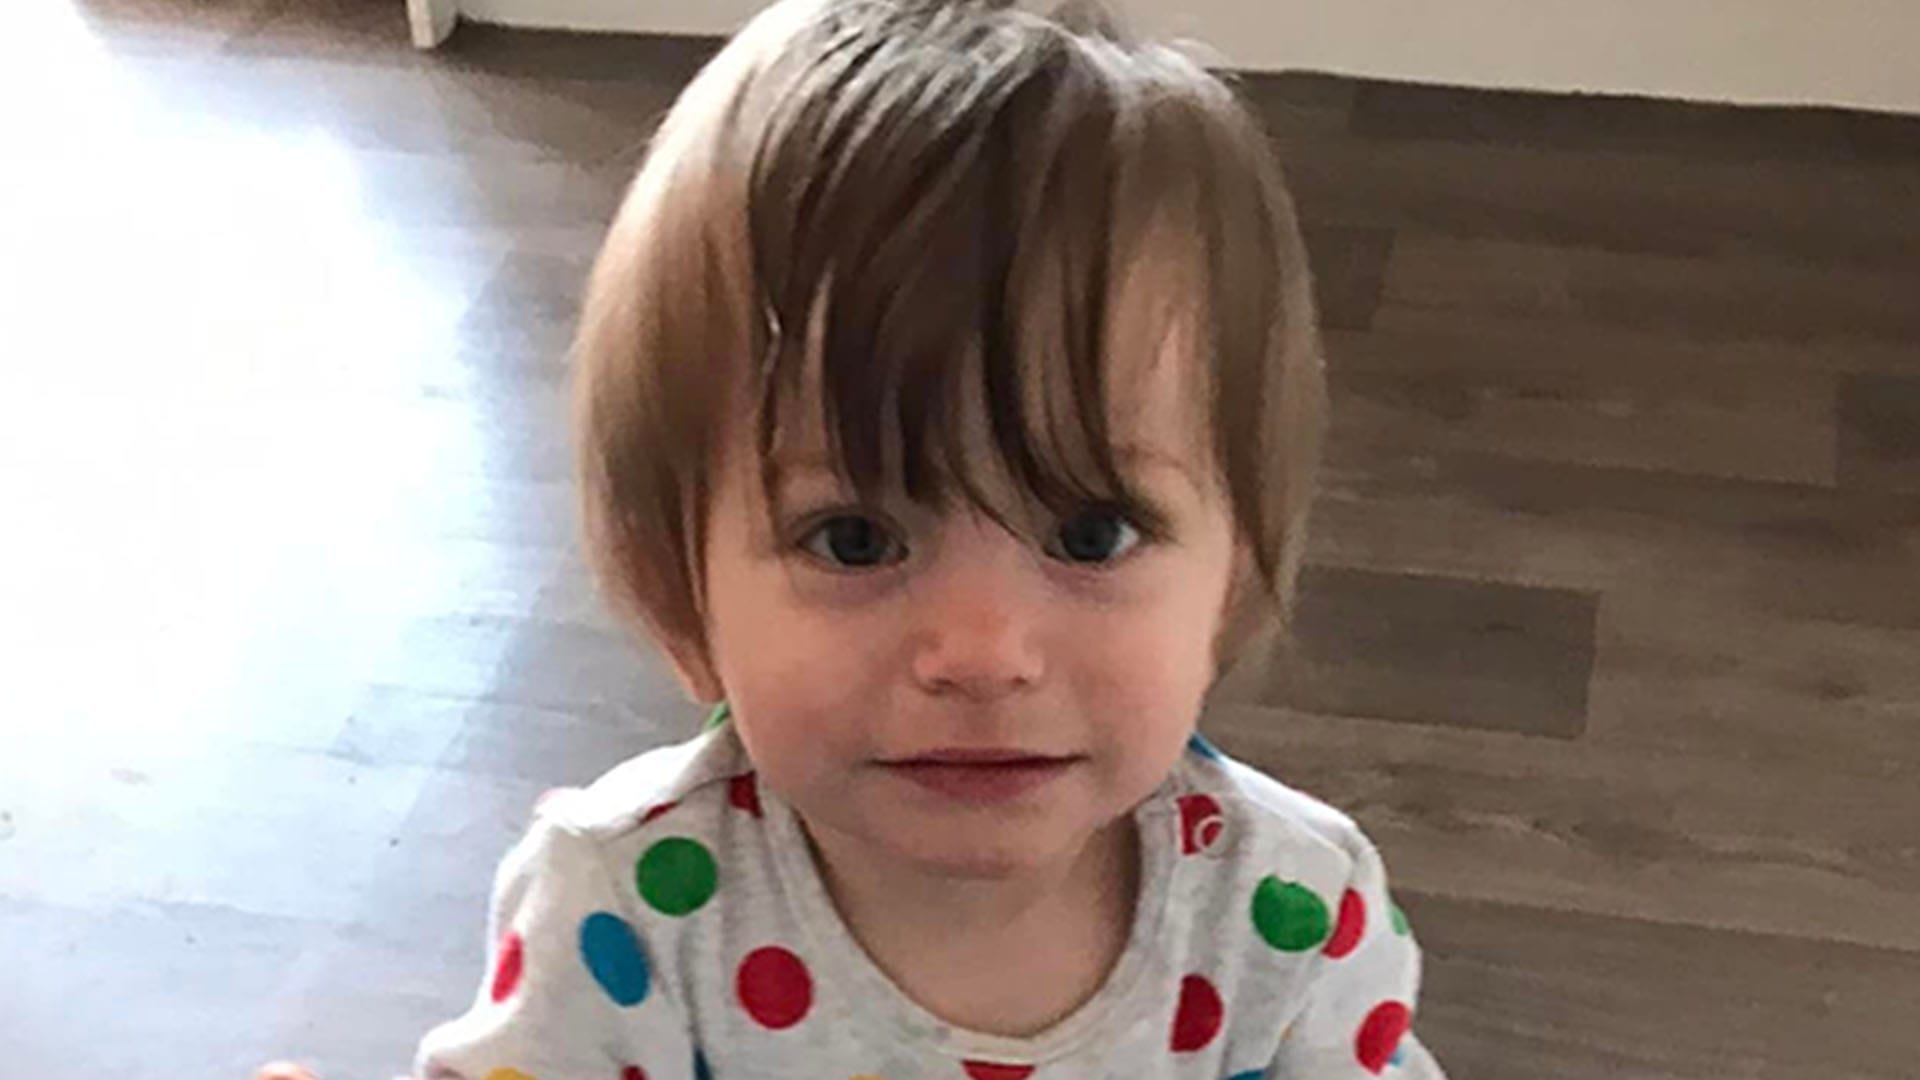 Horror as 'gorgeous' boy, 2, in Pudsey pyjamas is left to die alone next to his dead dad - why did no one save him?